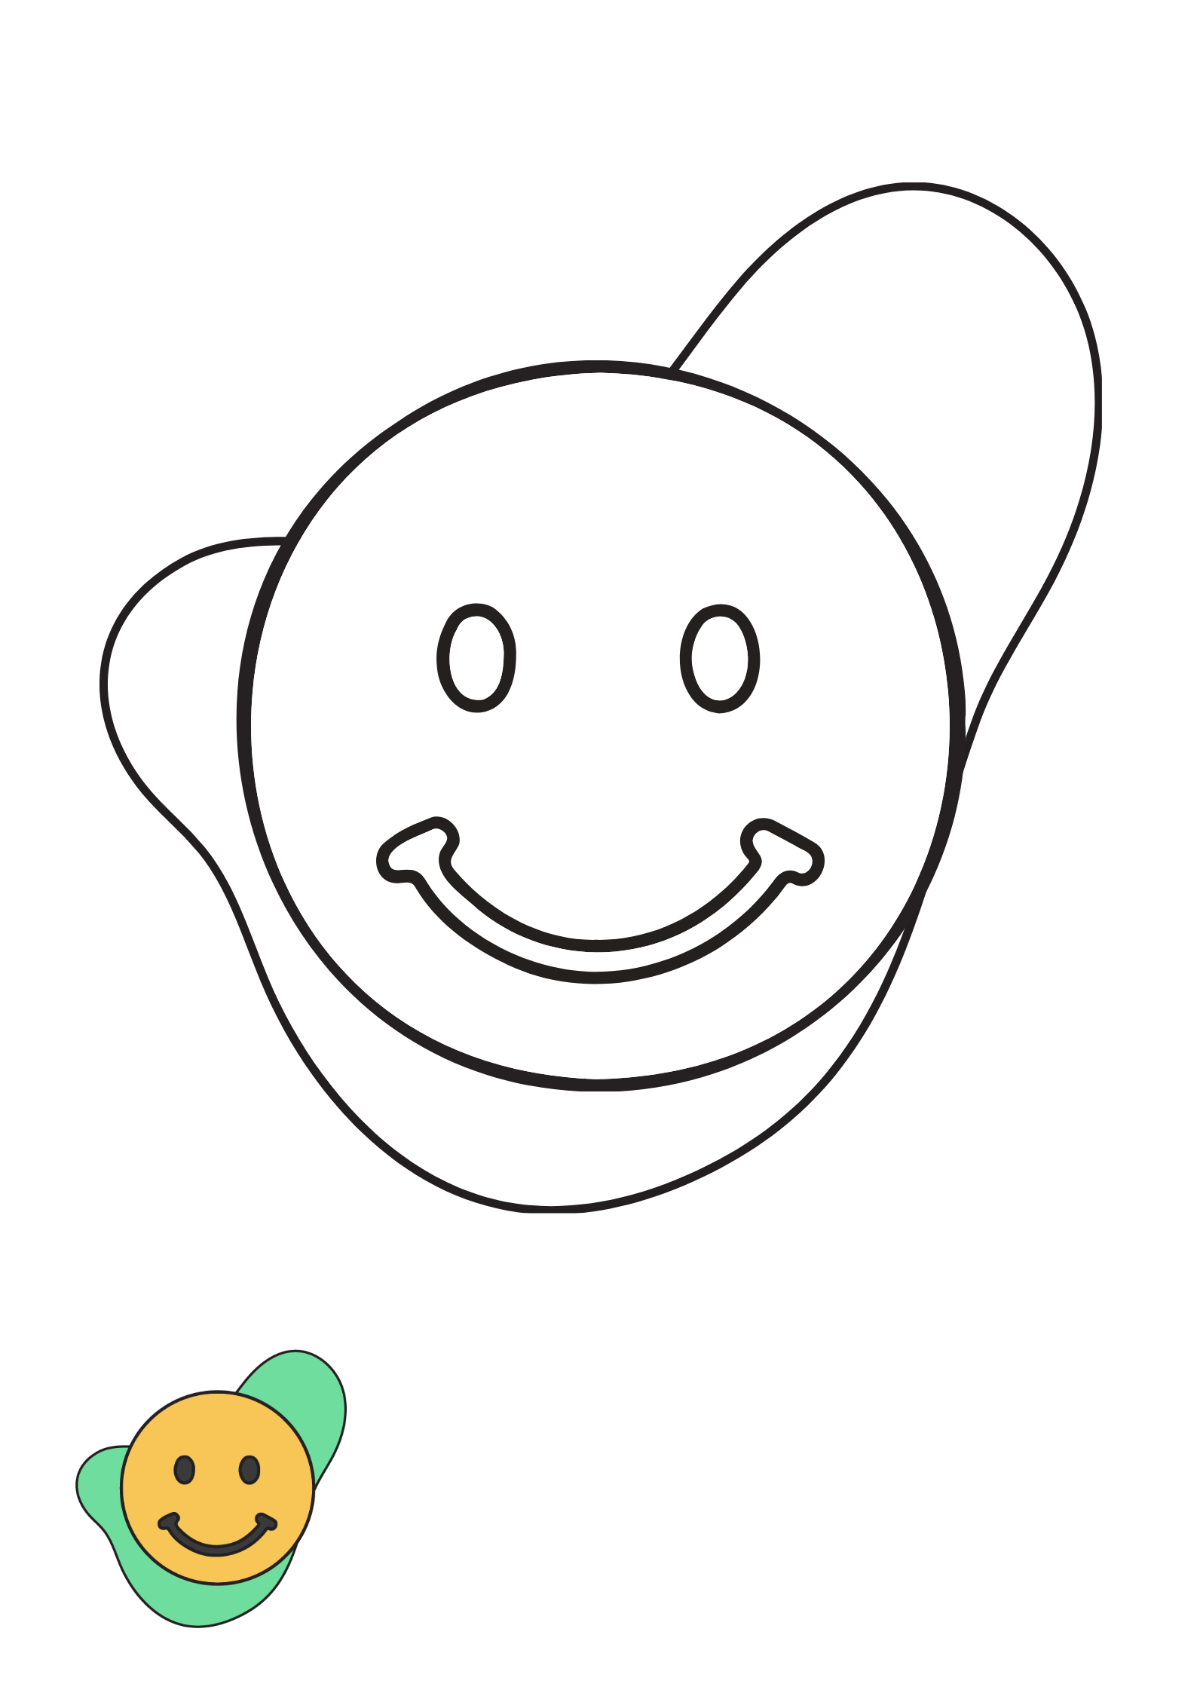 Free Smiley Face coloring page Template